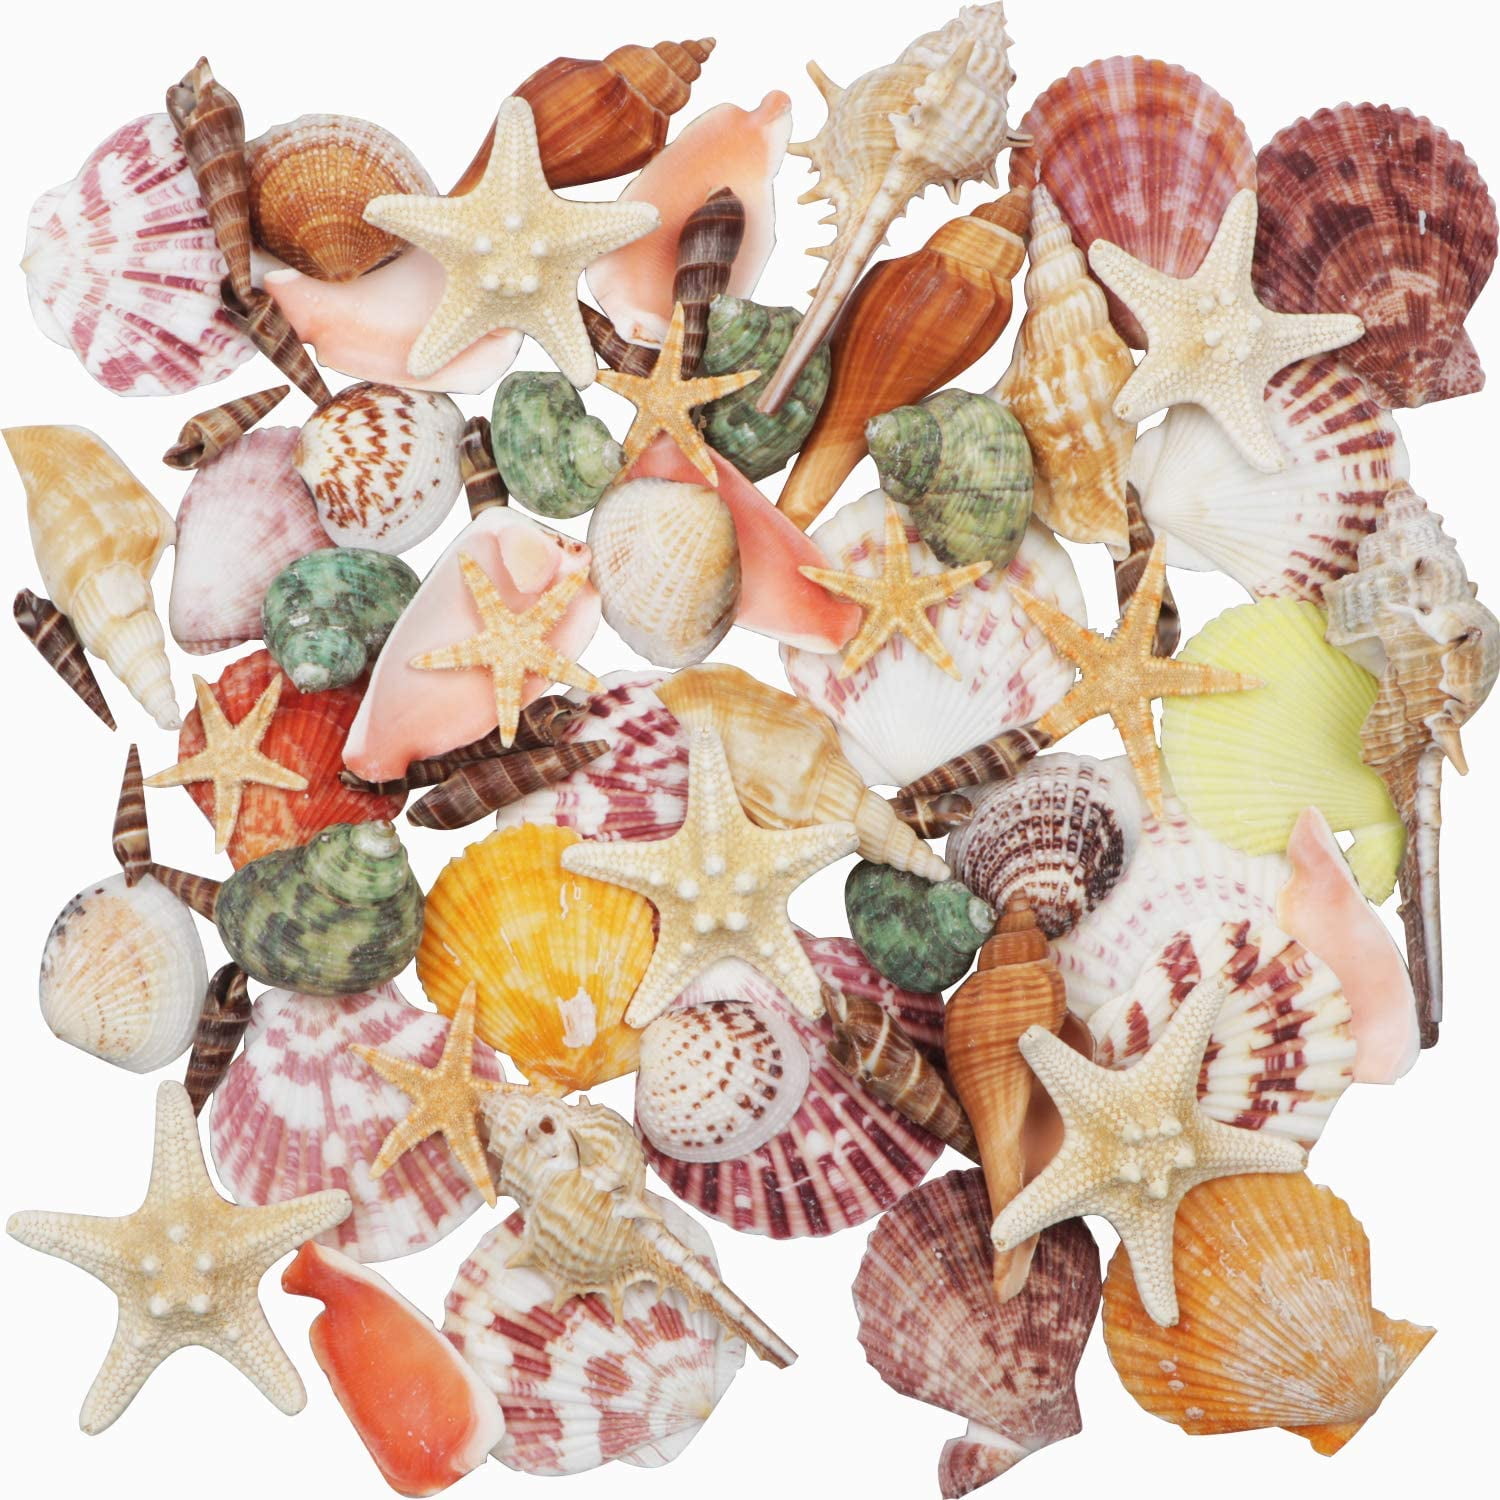 Famoby Sea Shells Mixed Beach Seashells Starfish for Beach Theme Party  Wedding Decorations DIY Crafts Candle Making Fish Tank Vase Fillers Home  Decorations Supplies 70+ pcs